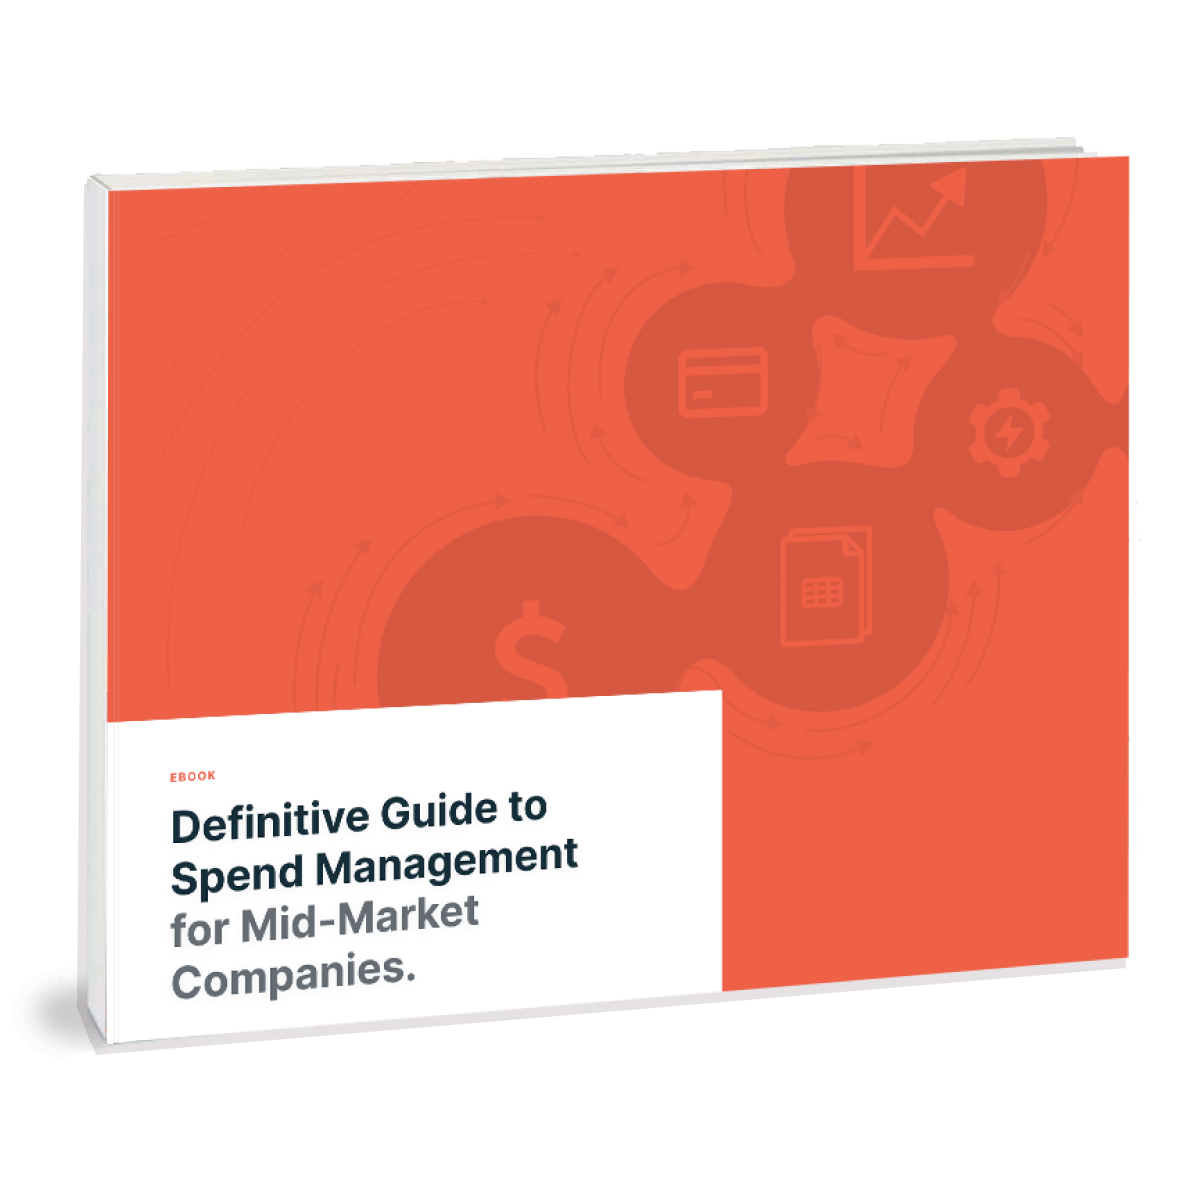 Definitive Guide to Spend Management for Mid-Market Companies.